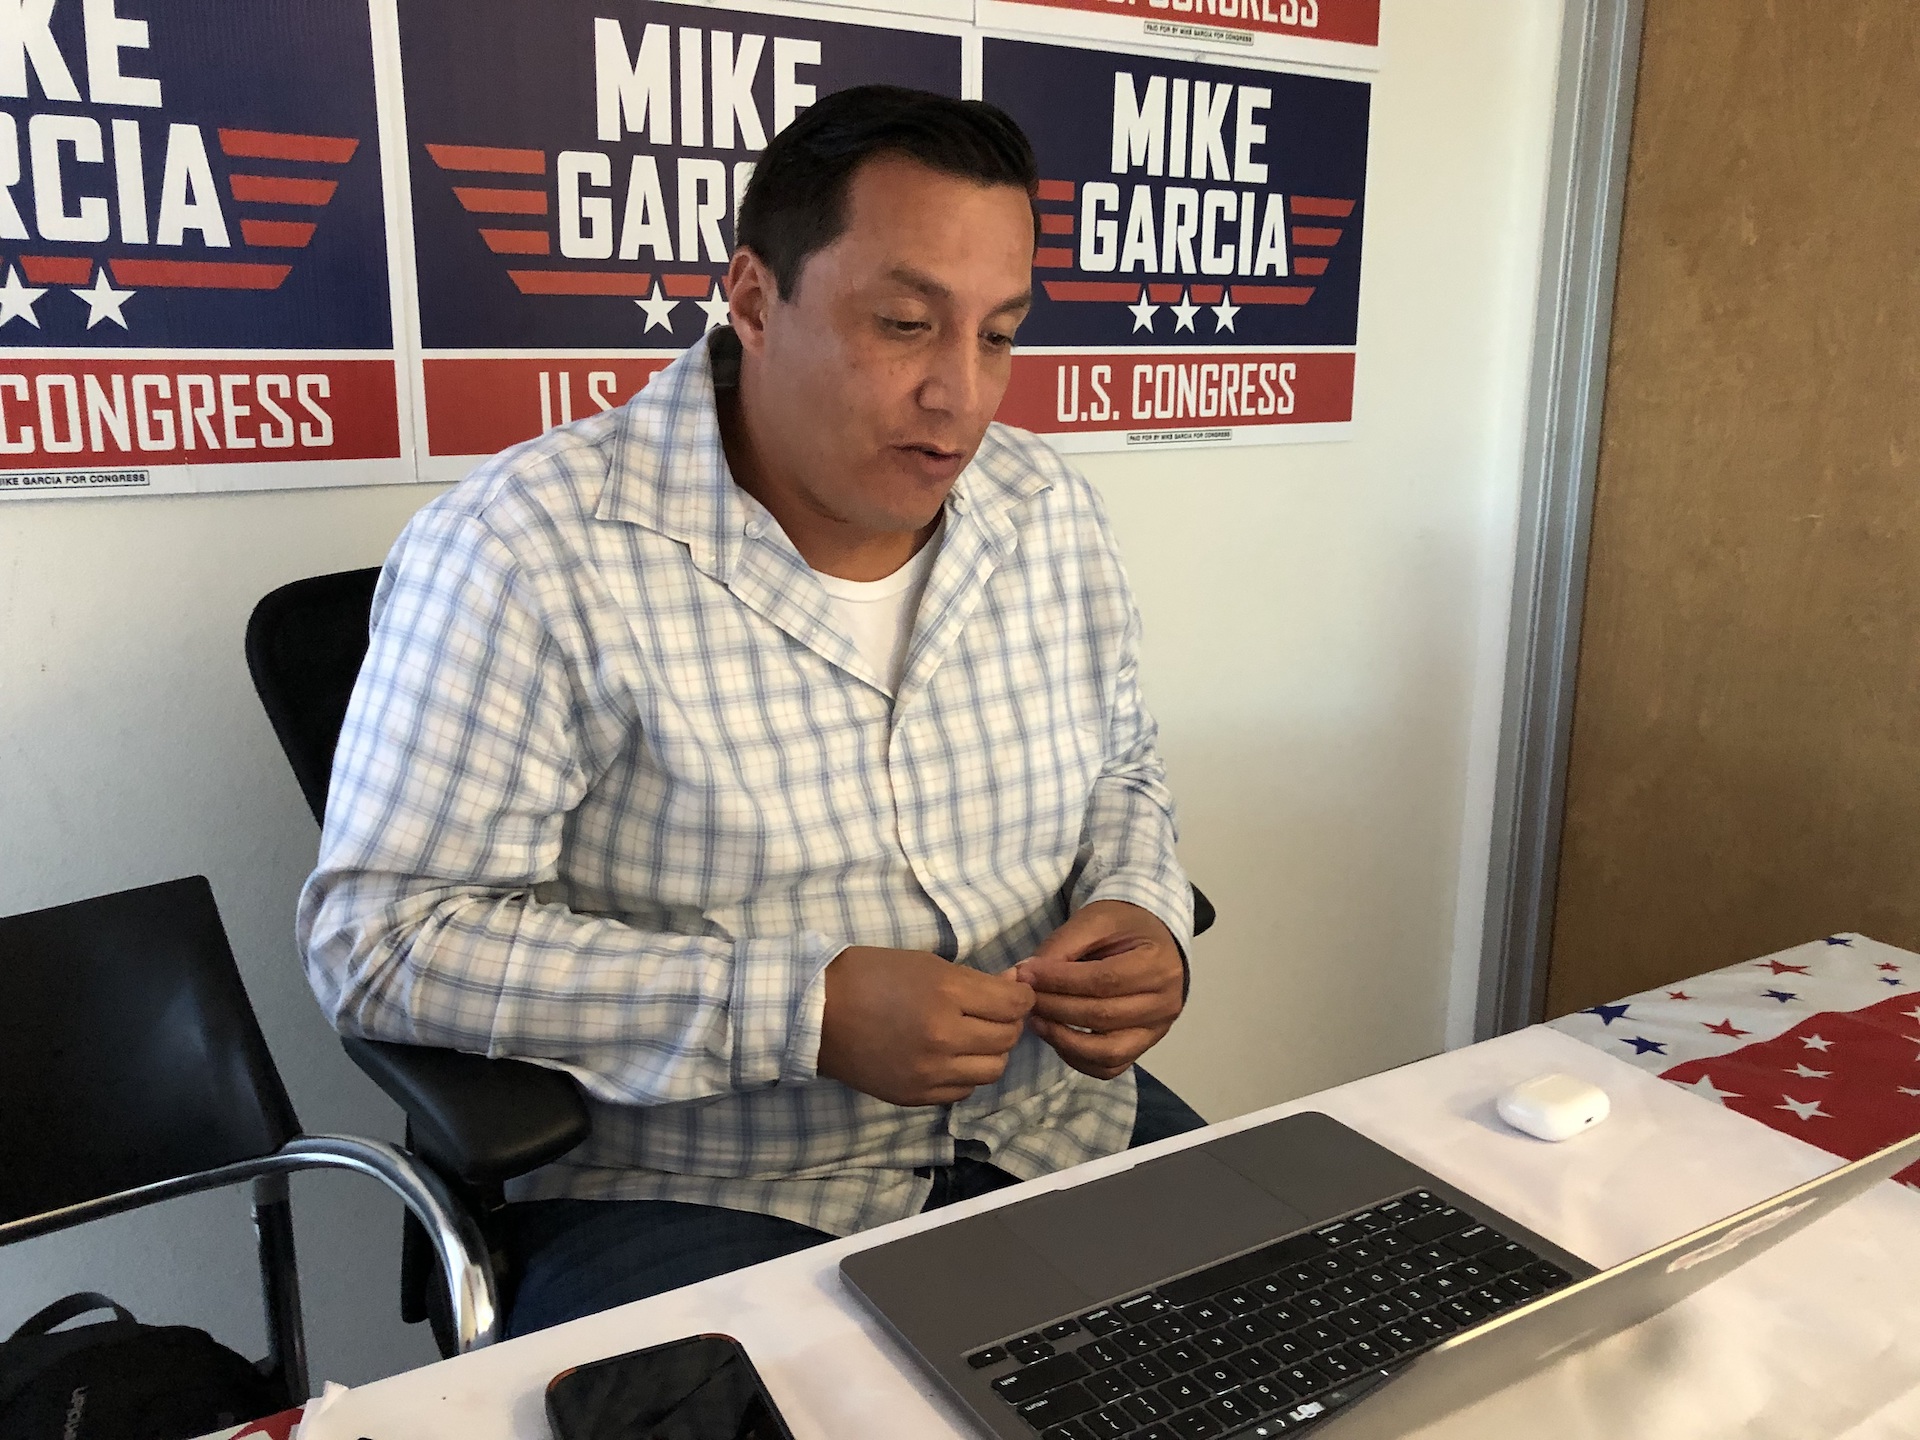 A man sits at a desk in front of a computer, with signs for Mike Garcia posted behind him.